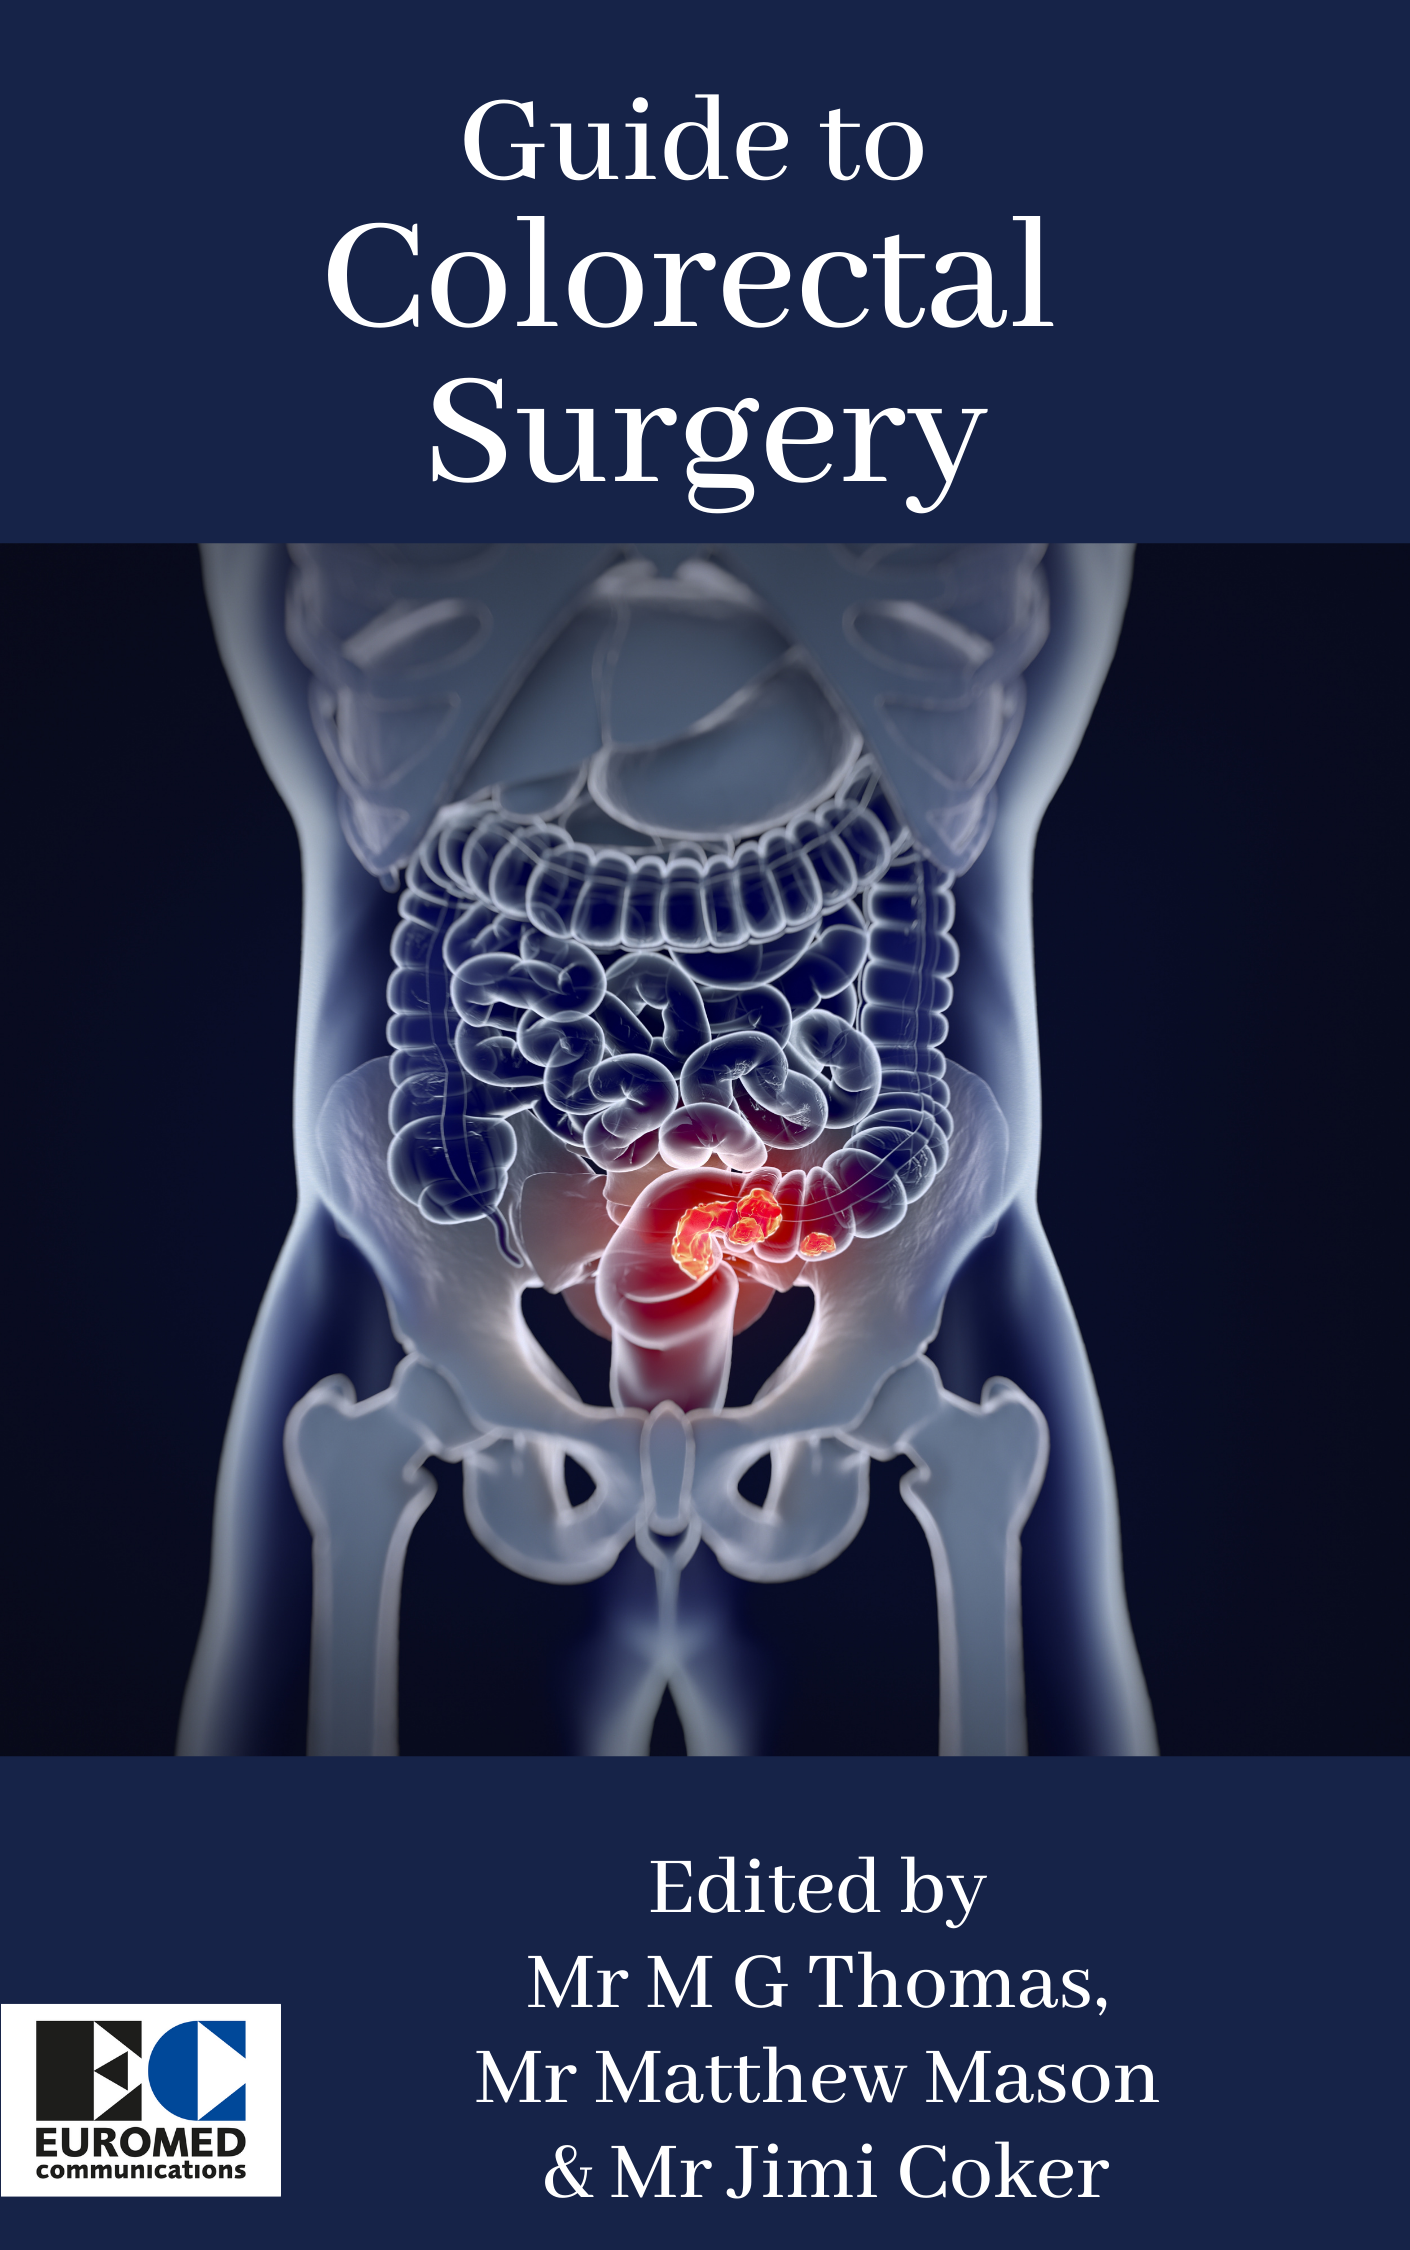 Guide to Colorectal Surgery